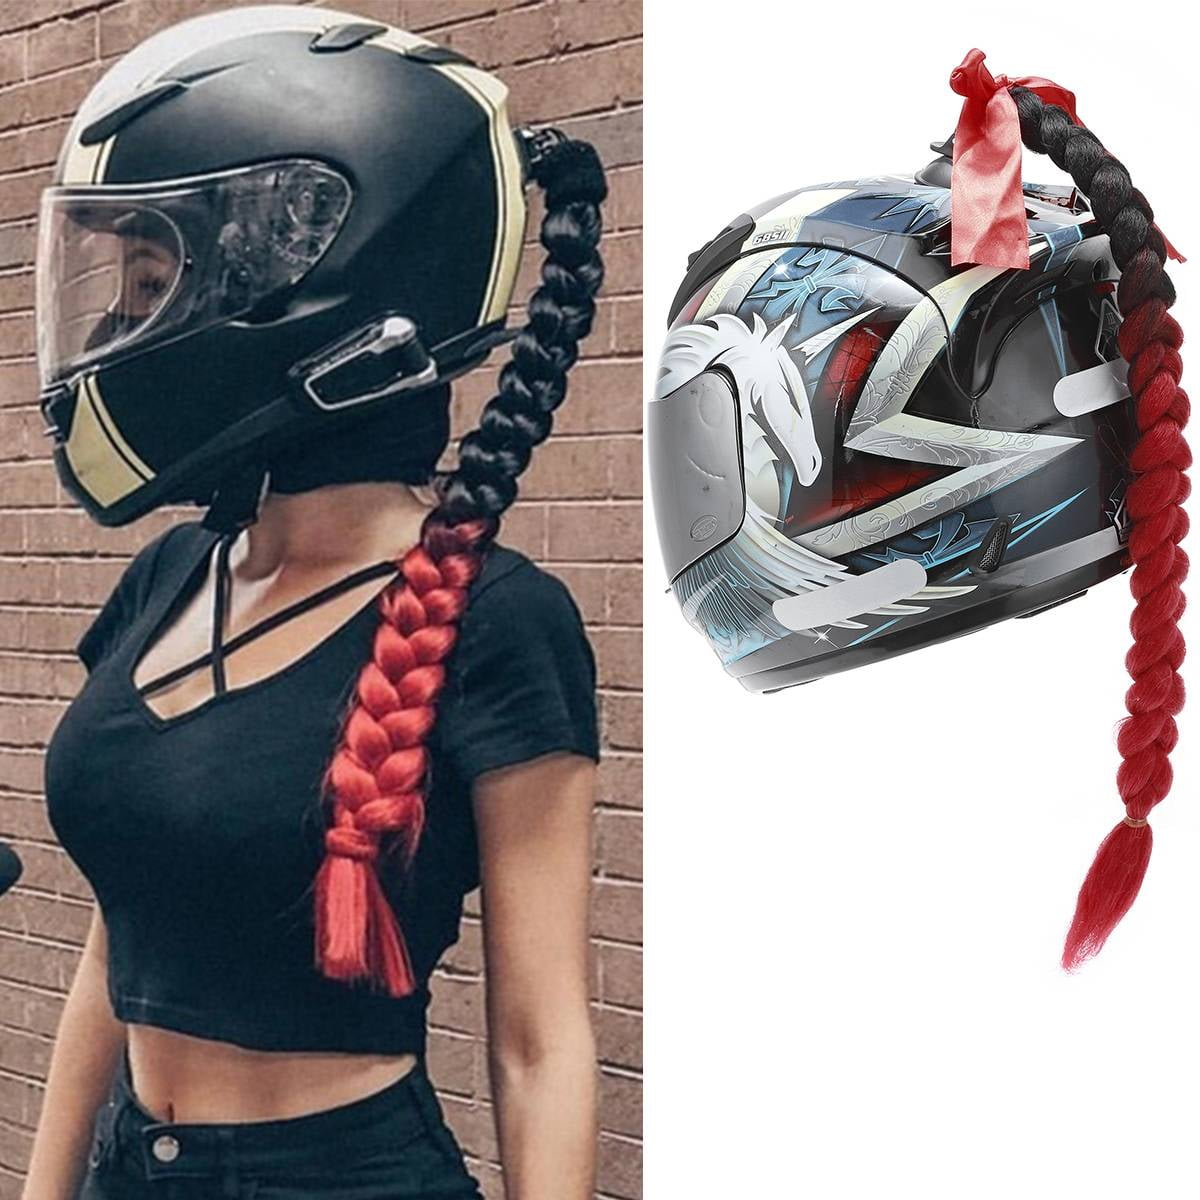 PAXLAMB Helmet Ponytail Pigtails Braids Hair with Bowknot Detachable Suction Cup for Motorcycle Bike Bicycle Cycling Bikers Riders Skateboarding Scooter Costume Cosplay Tactical Outdoor Helmets